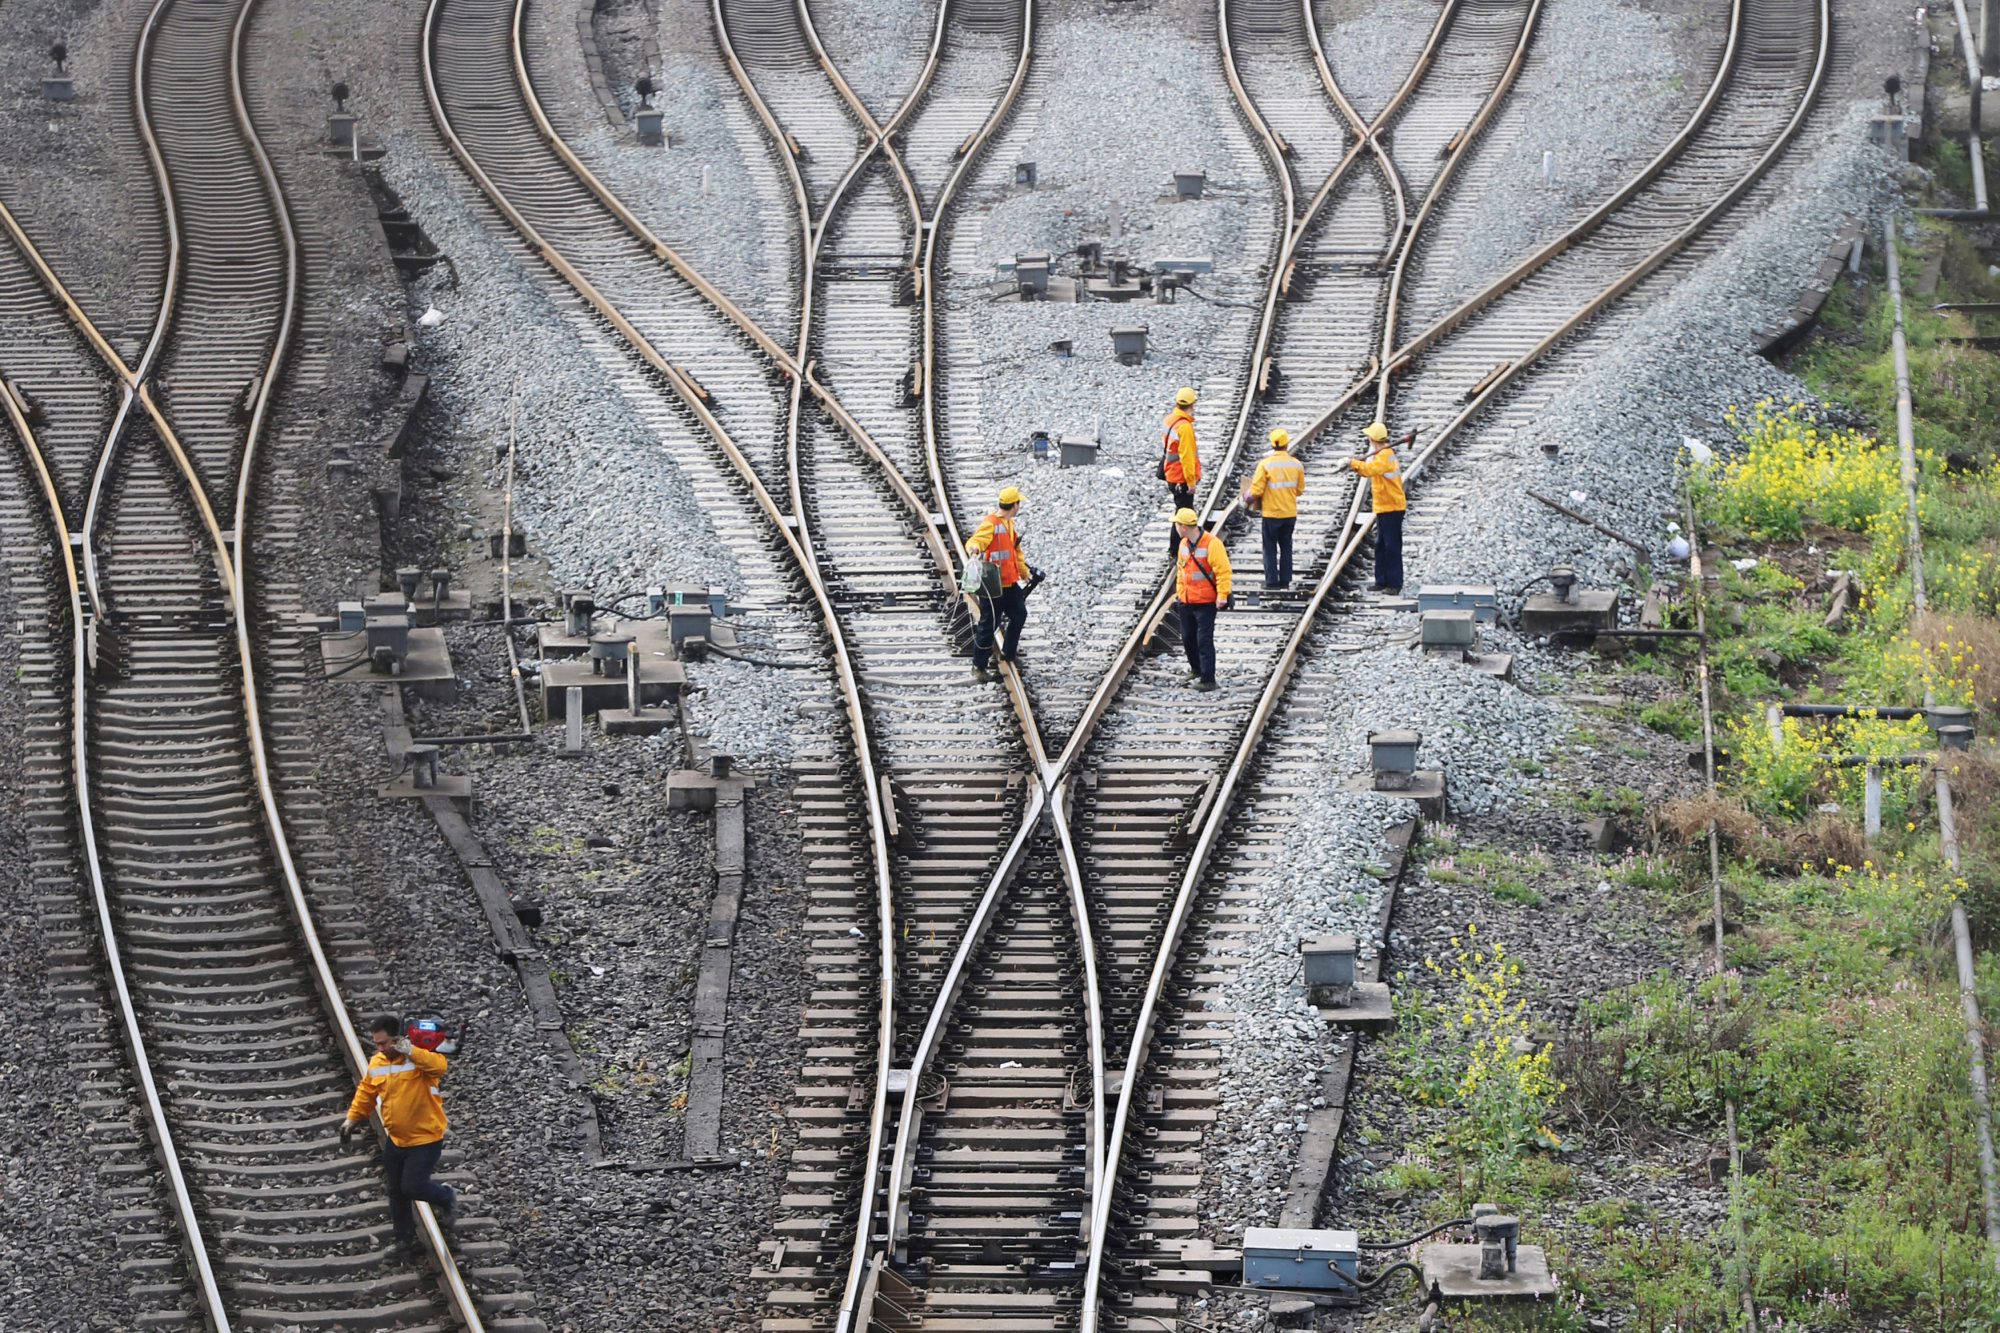 Workers inspect railway tracks that serve as a part of the 'Belt and Road' freight rail route linking Chongqing, China, to Duisburg, Germany, at the Dazhou railway station in Sichuan province, China, on March 14. | REUTERS